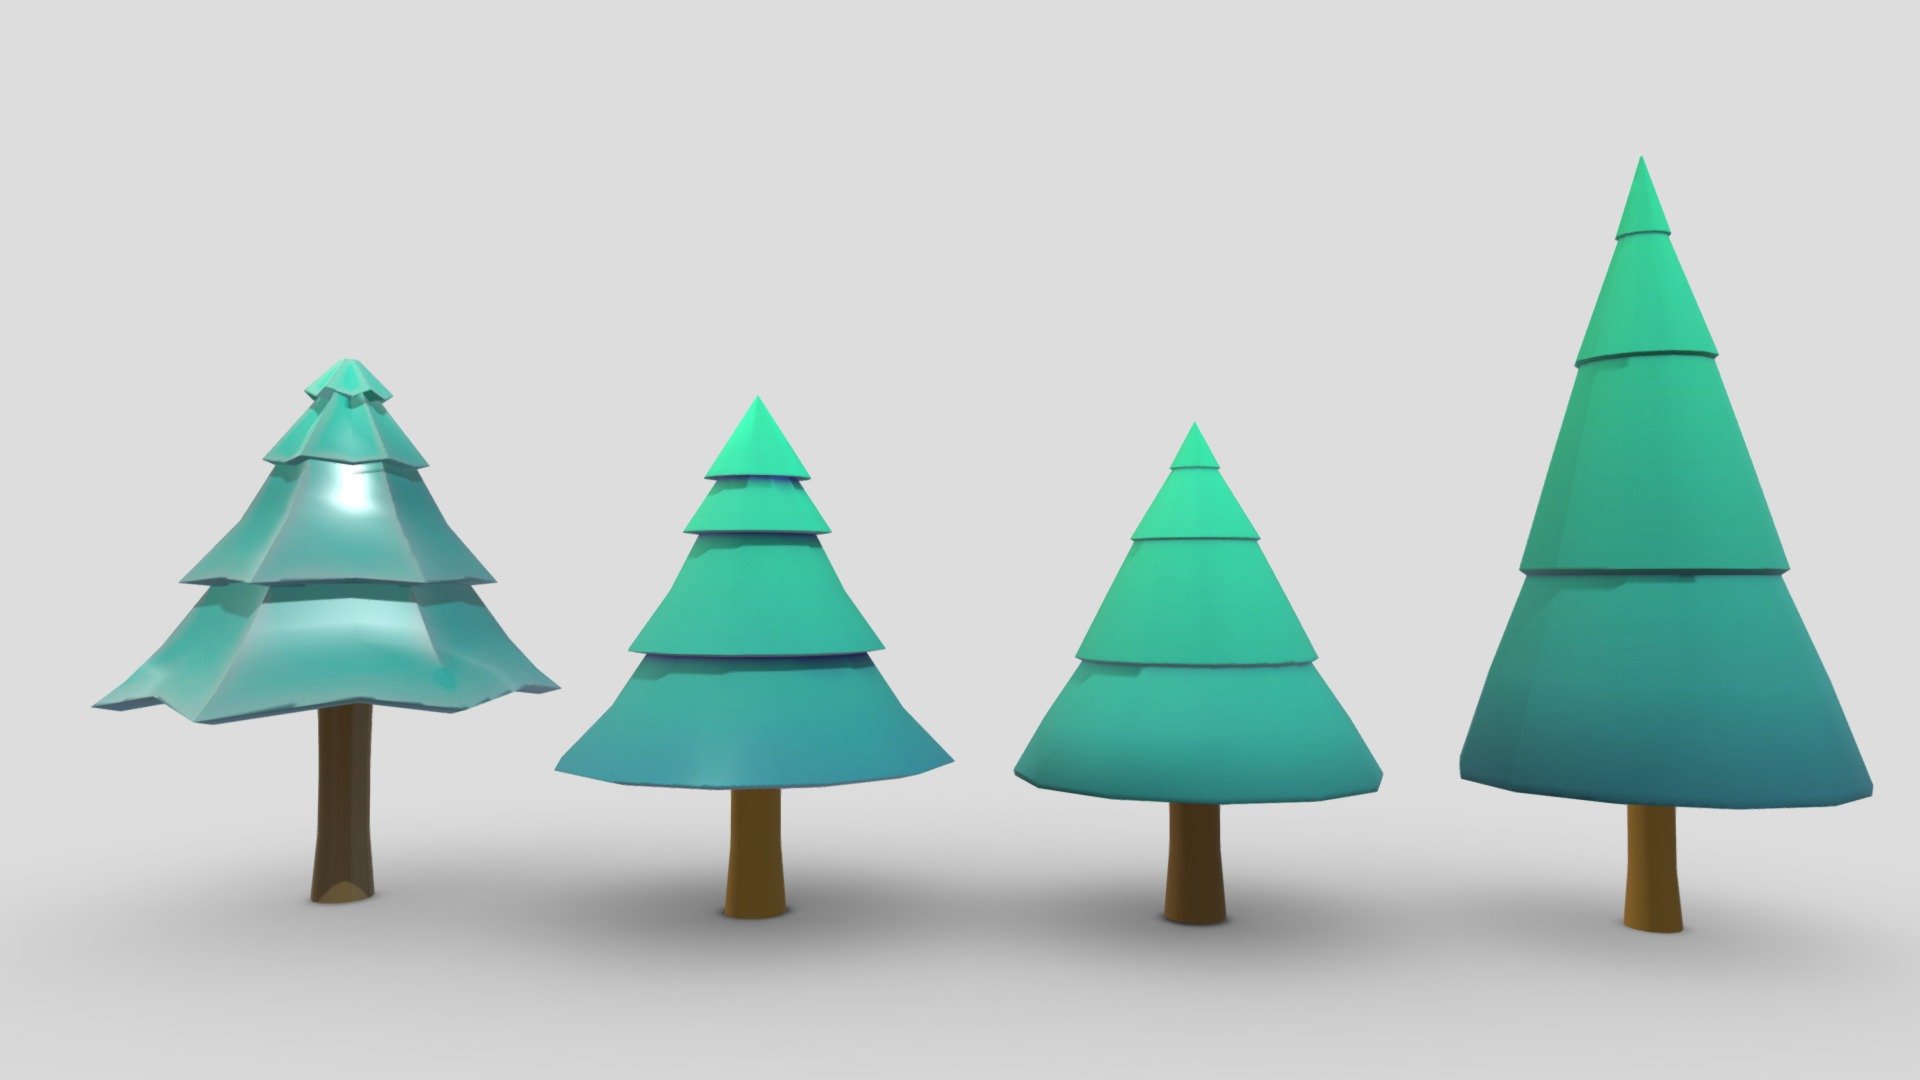 This is a 3D low poly model pack of stylize tree. I model this pack base on my concept of the Pine tree. I hope this will be useful for you 3d model